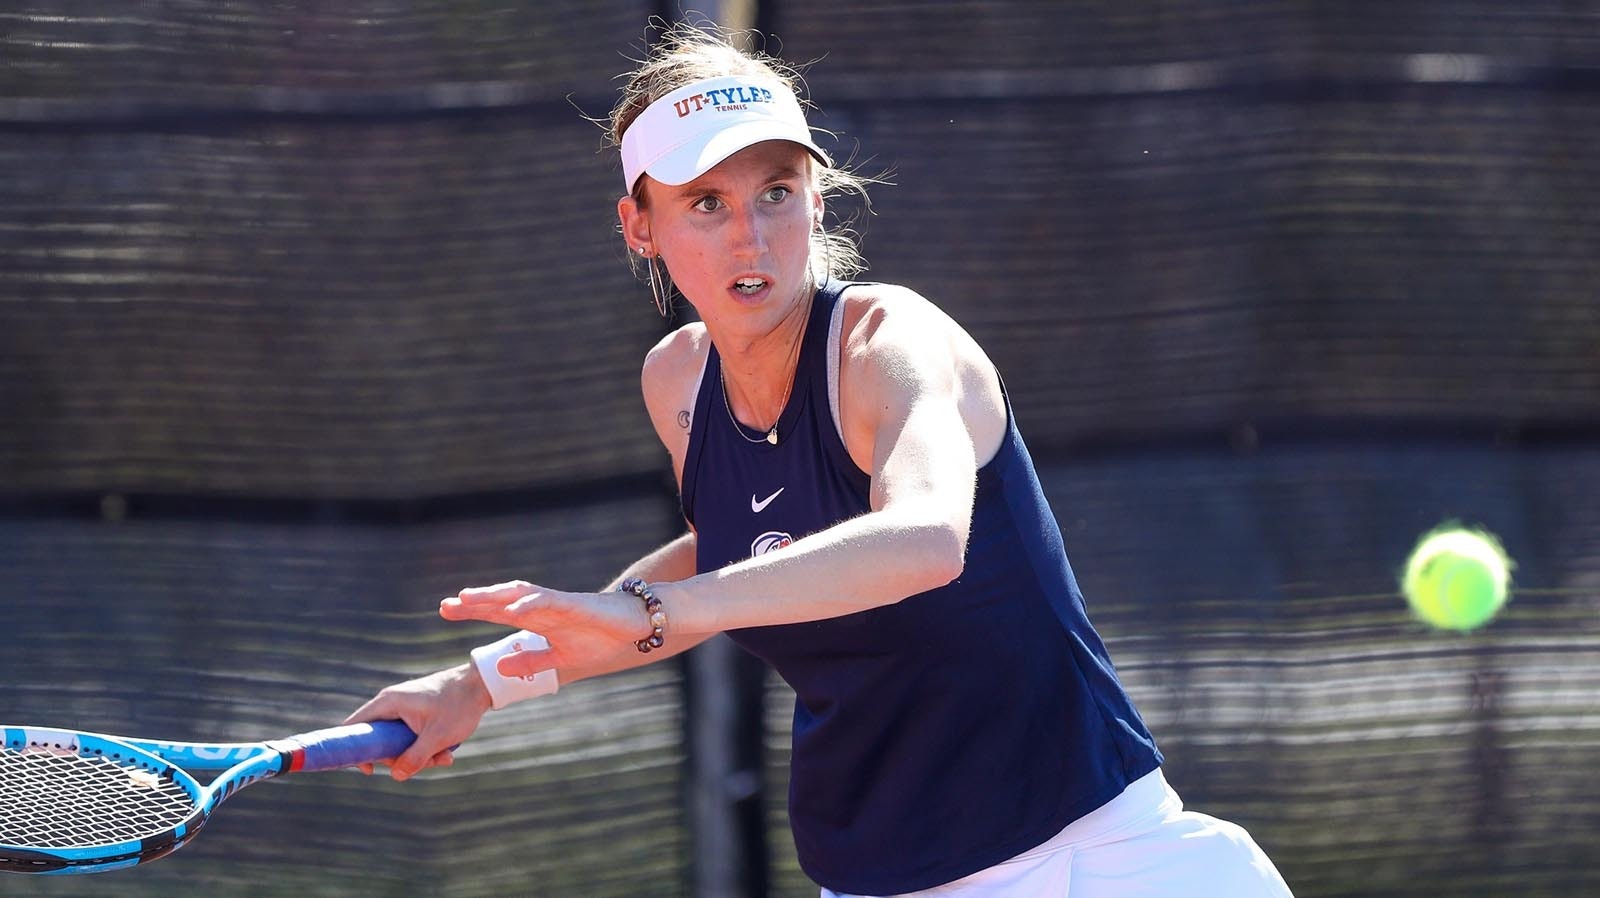 Brooklyn Ross, 27, plays for the University of Texas at Tyler tennis team and is registered to play in this weekend's Wyoming Governor's Cup tournament in Cheyenne. Because Ross is a transgender athlete, Cheyenne Tennis Association Board President Jackie Fulkrod resigned.